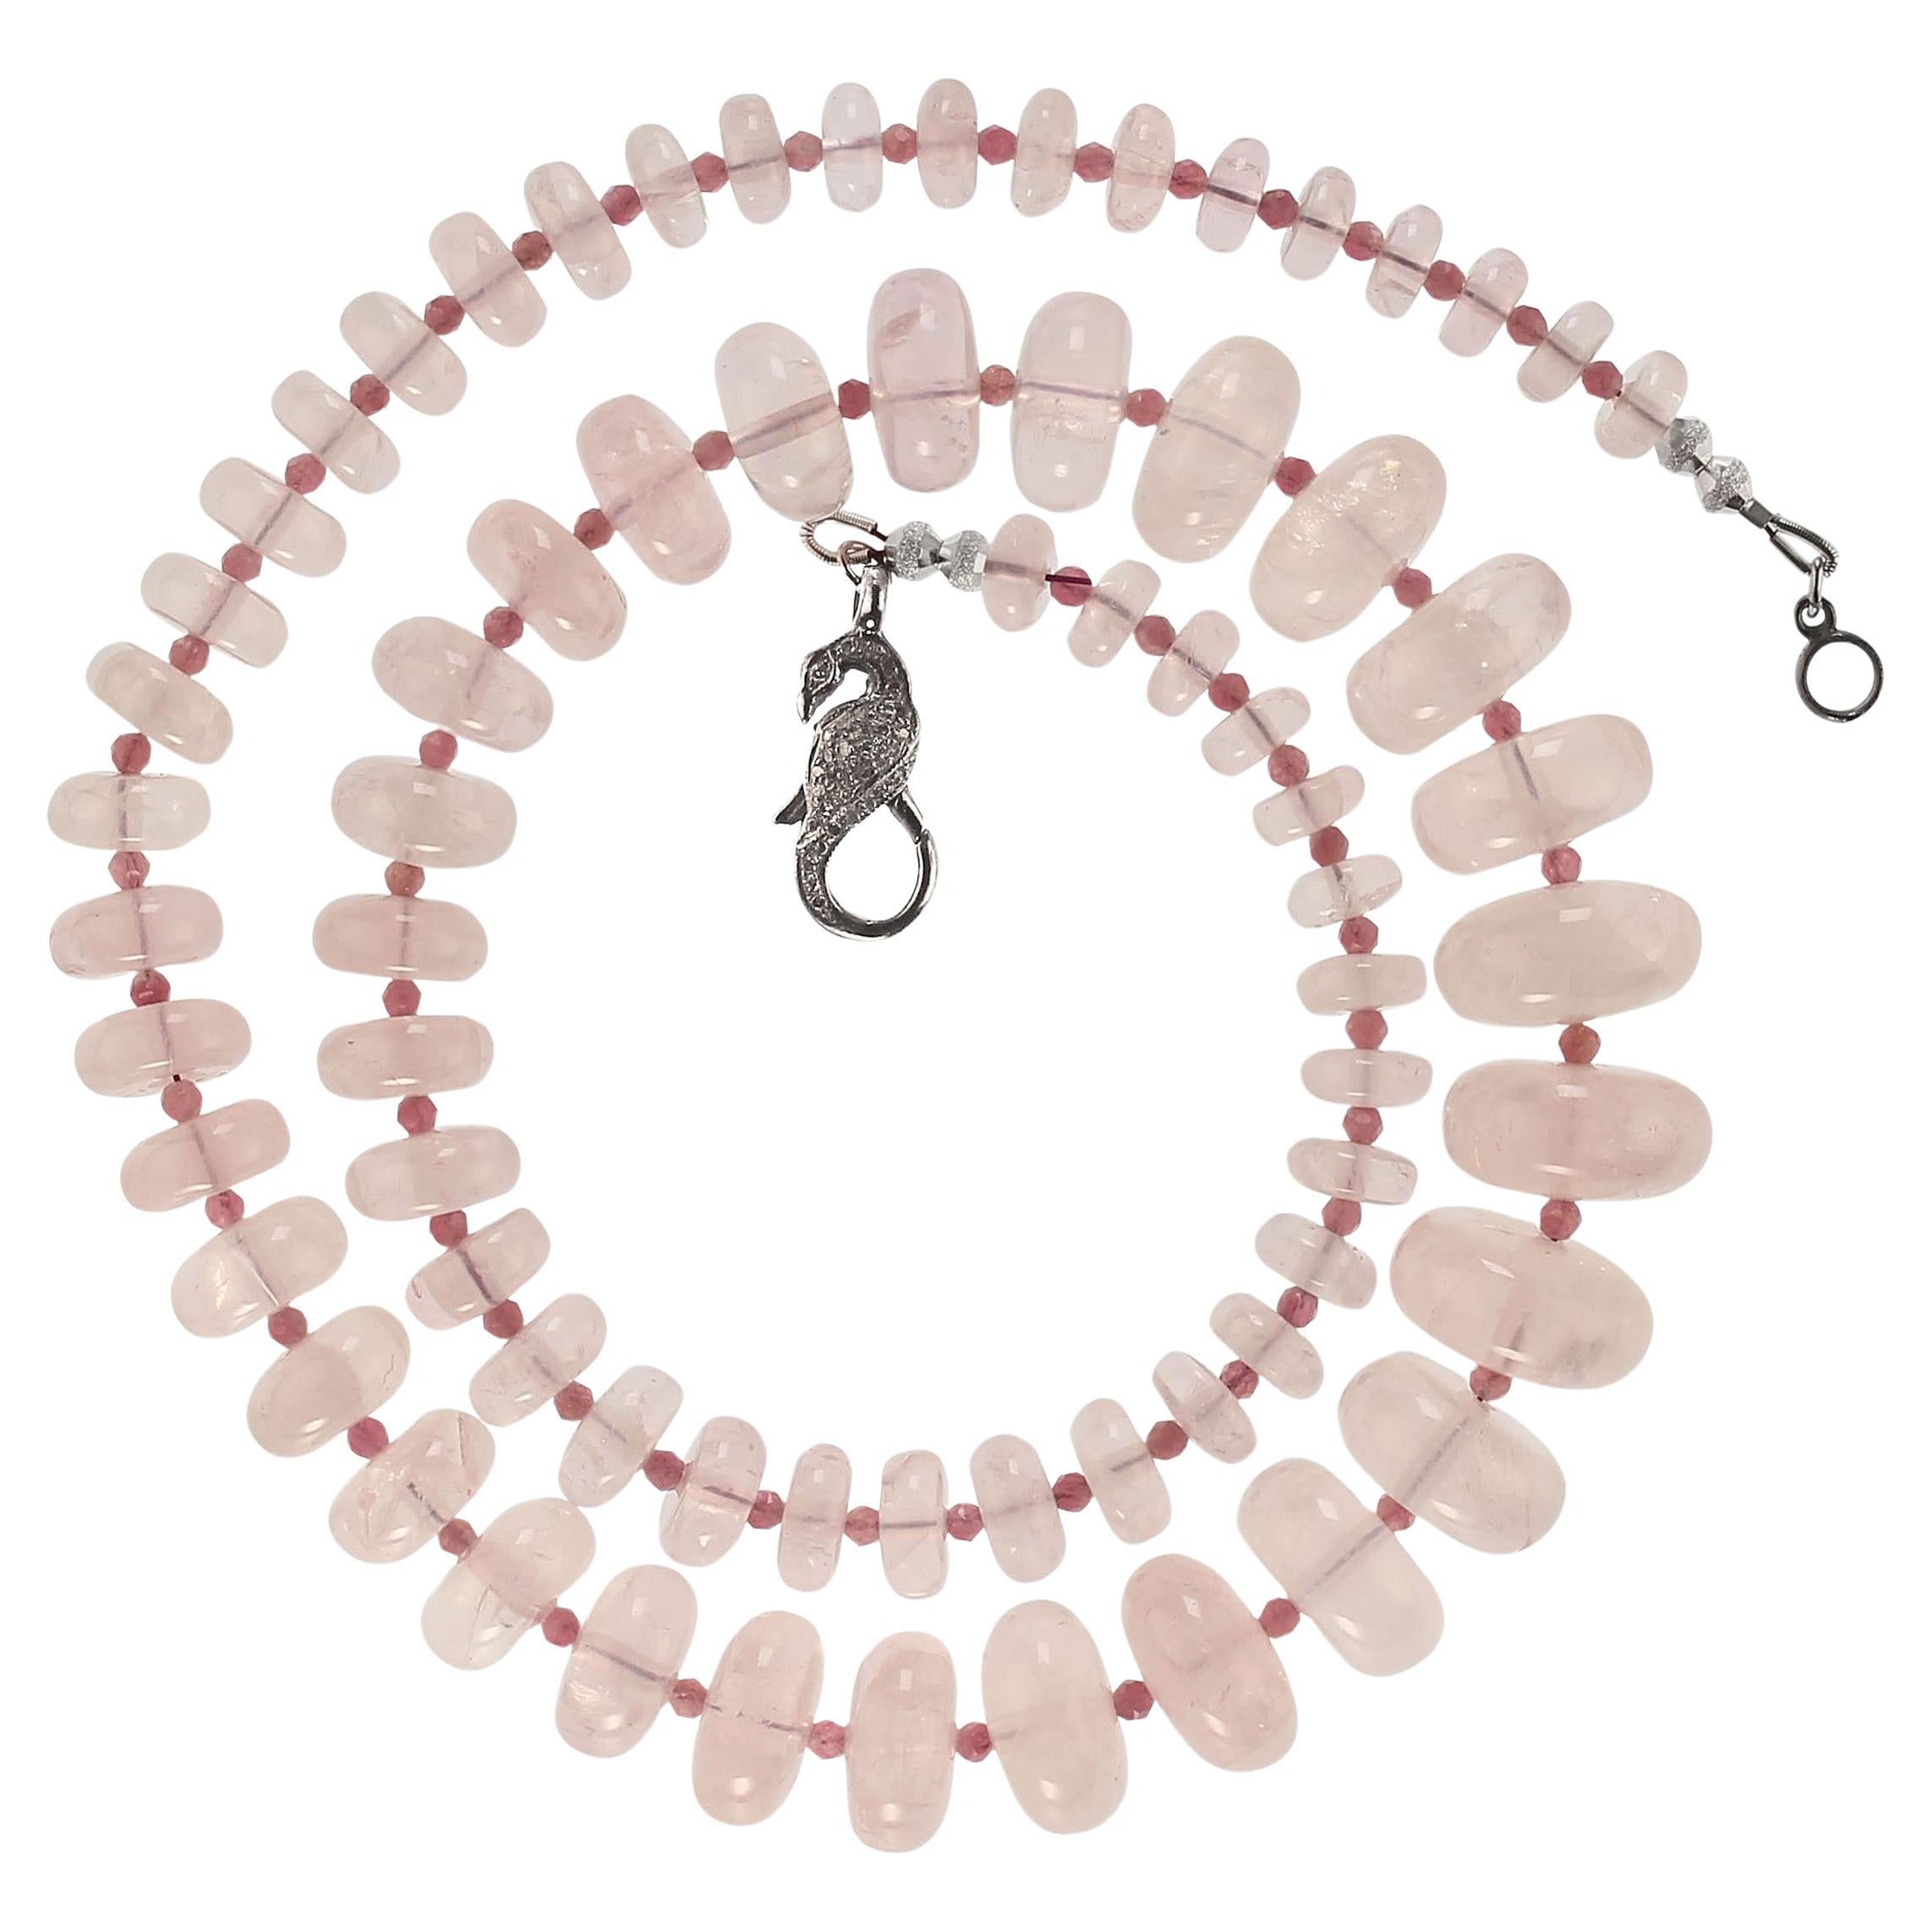 Bead AJD 24 Inch Graduated Rose Quartz Necklace Perfect Valentine's Day Gift! For Sale